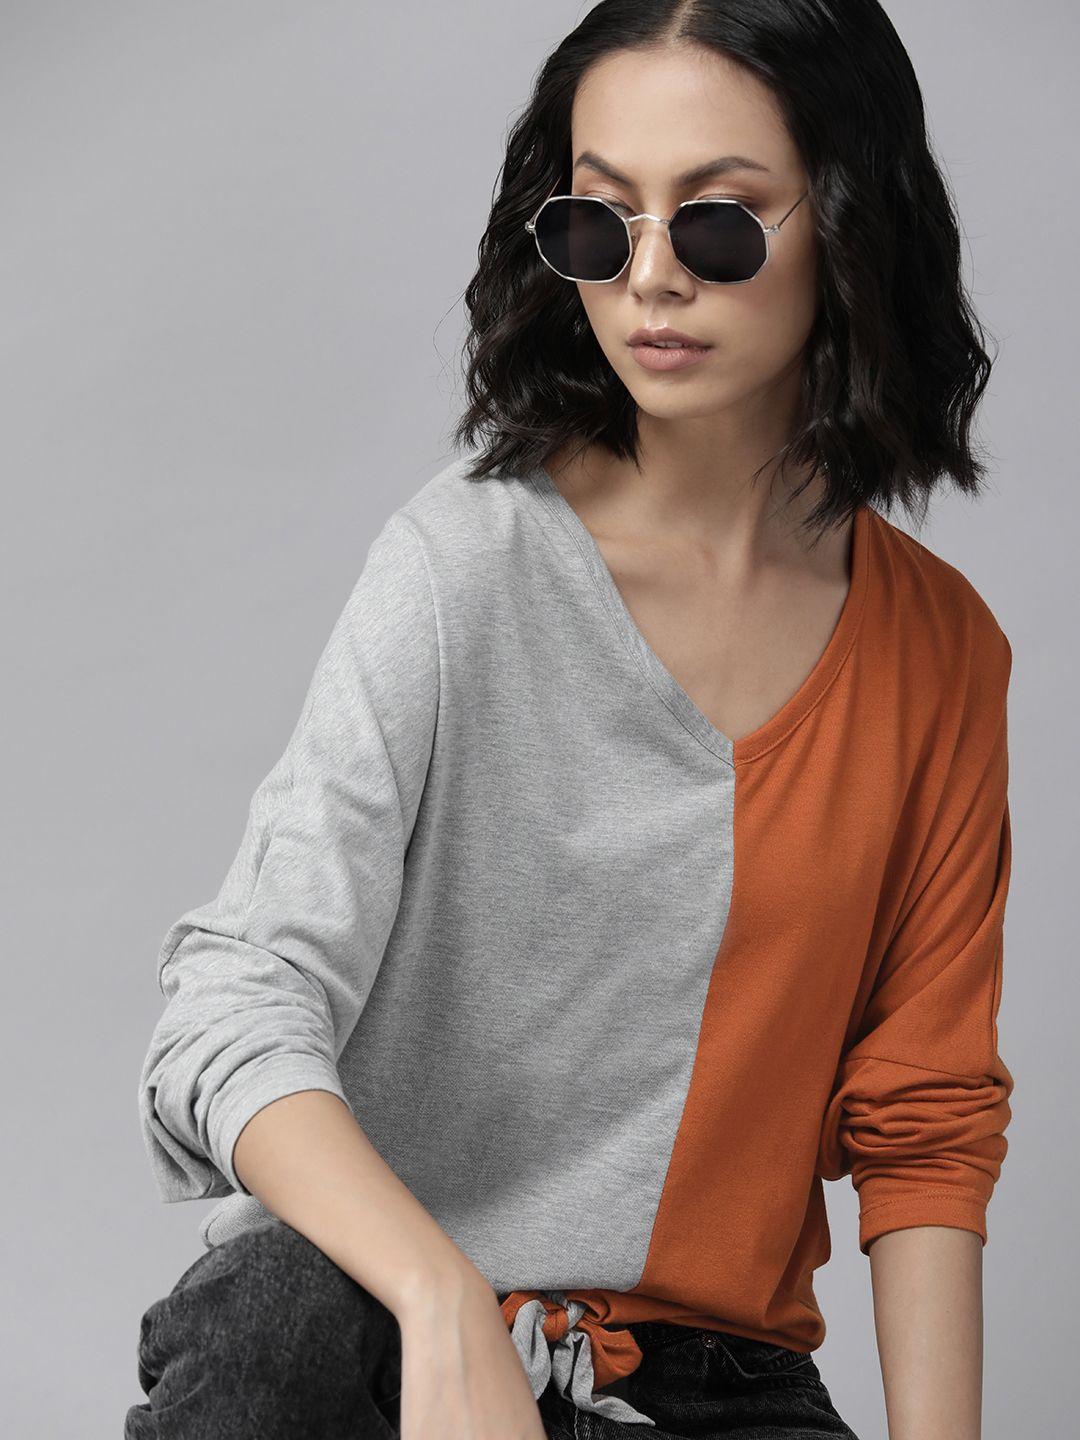 the roadster lifestyle co. orange & grey colourblocked extended sleeves front tie-up top